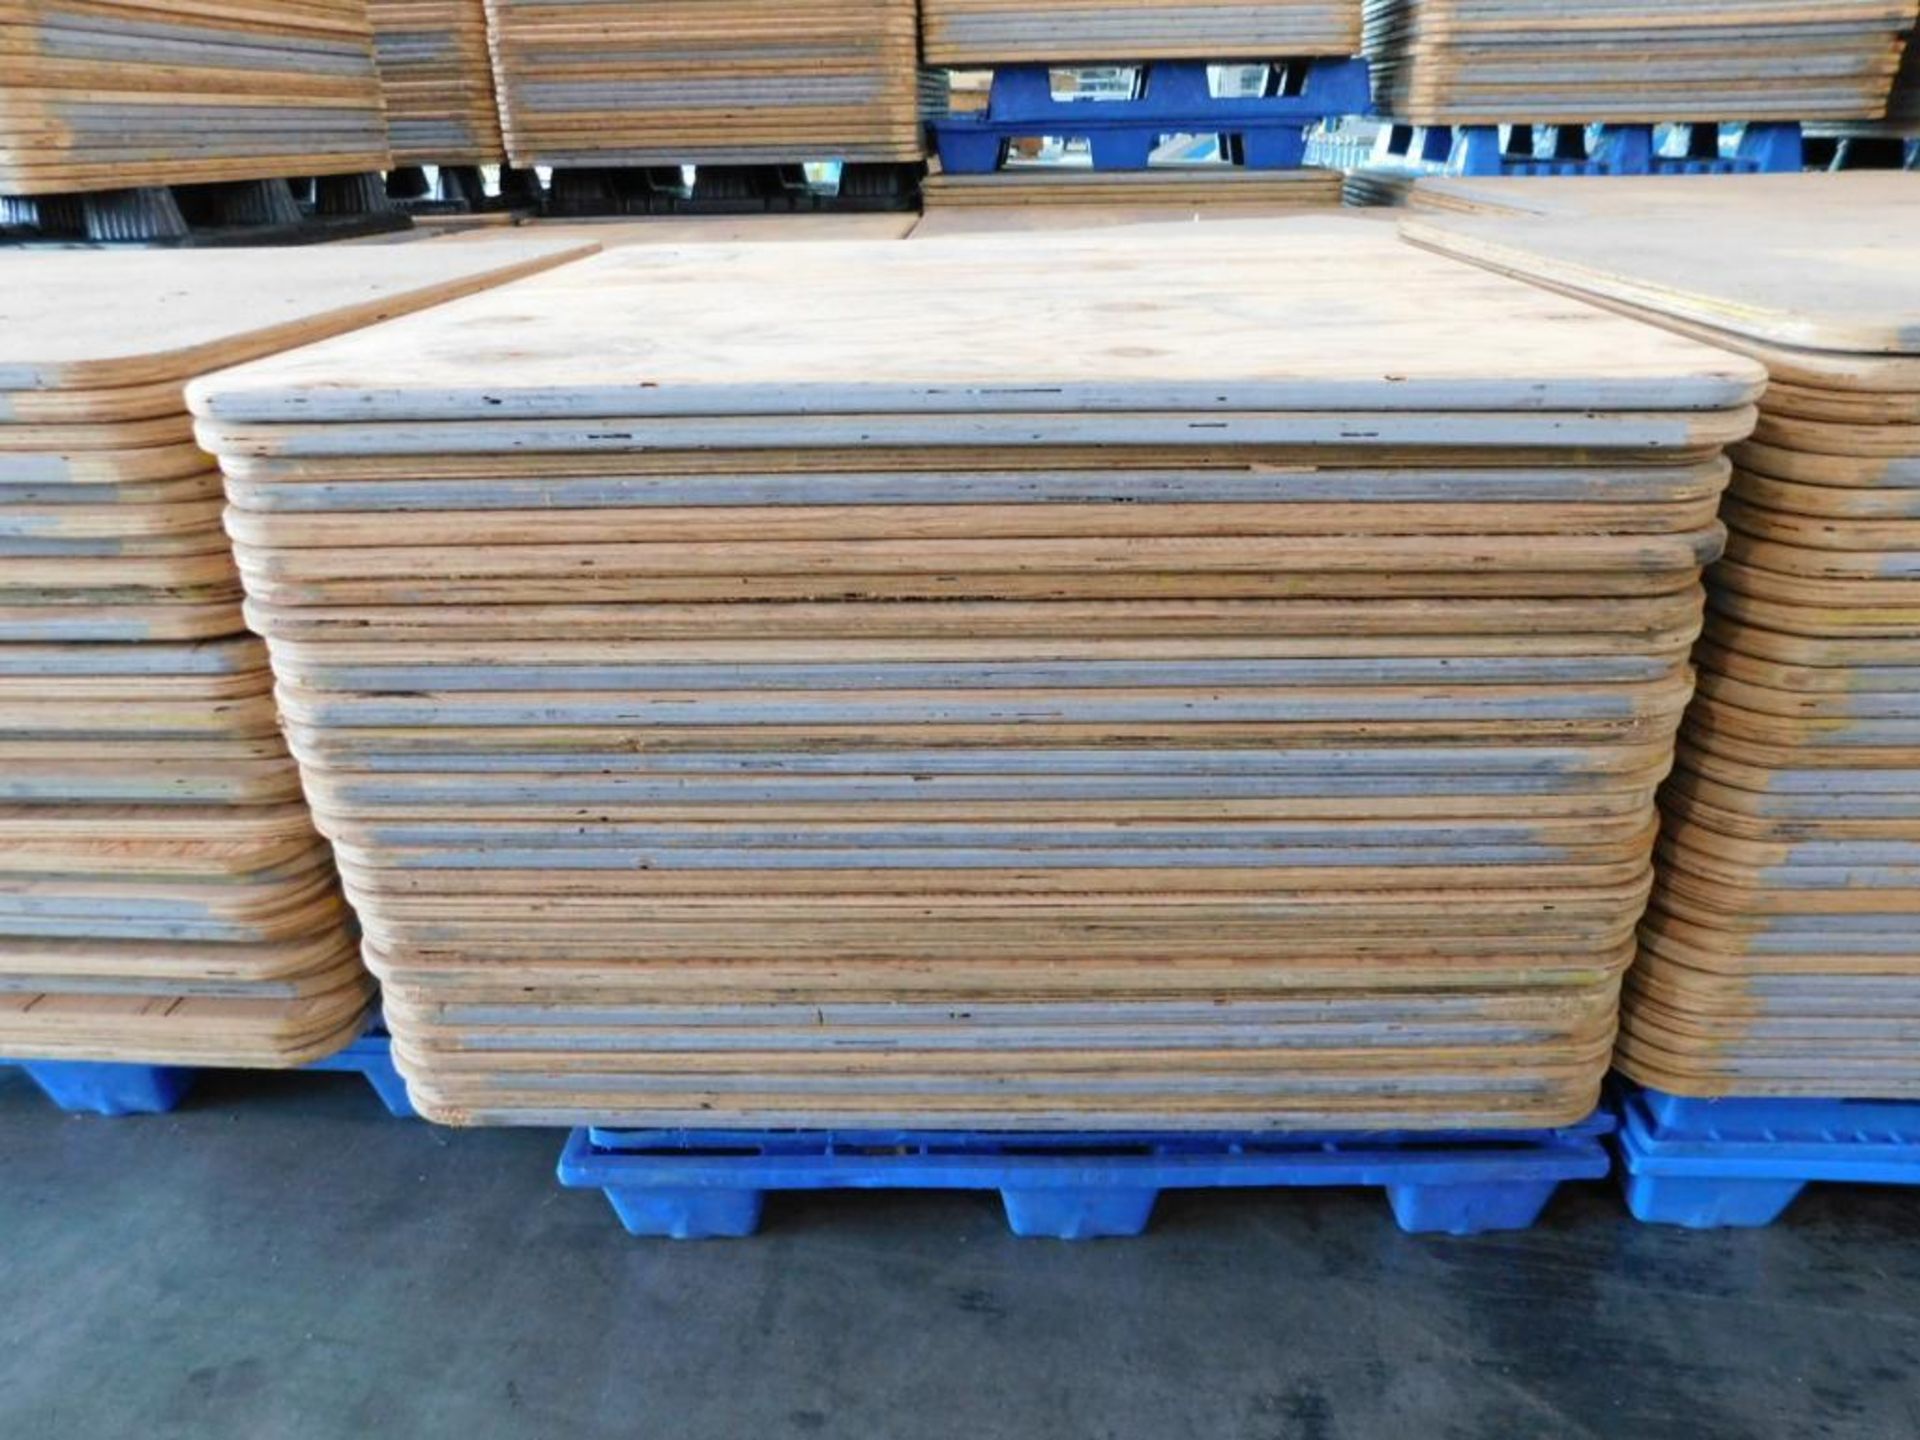 LOT: Large Quantity of 50" x 50" Wood Paper Roll Pallets on (7) Plastic Pallets (LOCATION: IN MAIL R - Image 5 of 6